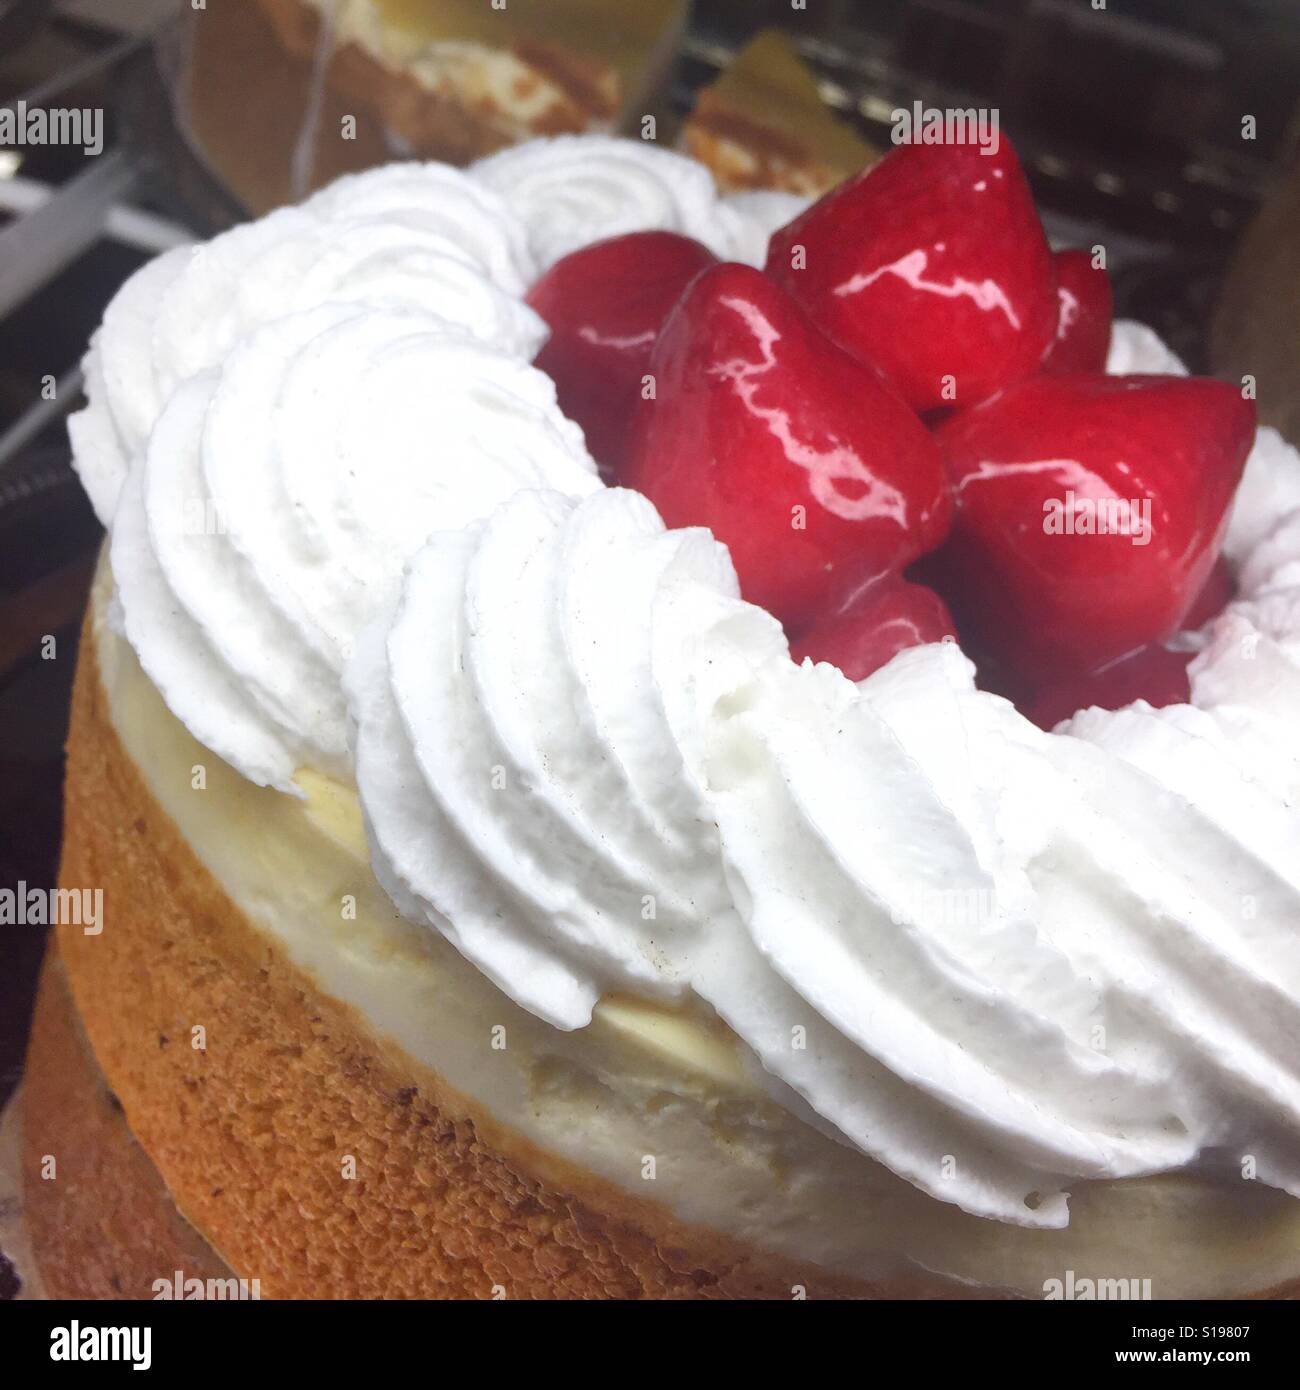 A close up photo of a cheesecake topped with thick white icing and strawberries Stock Photo